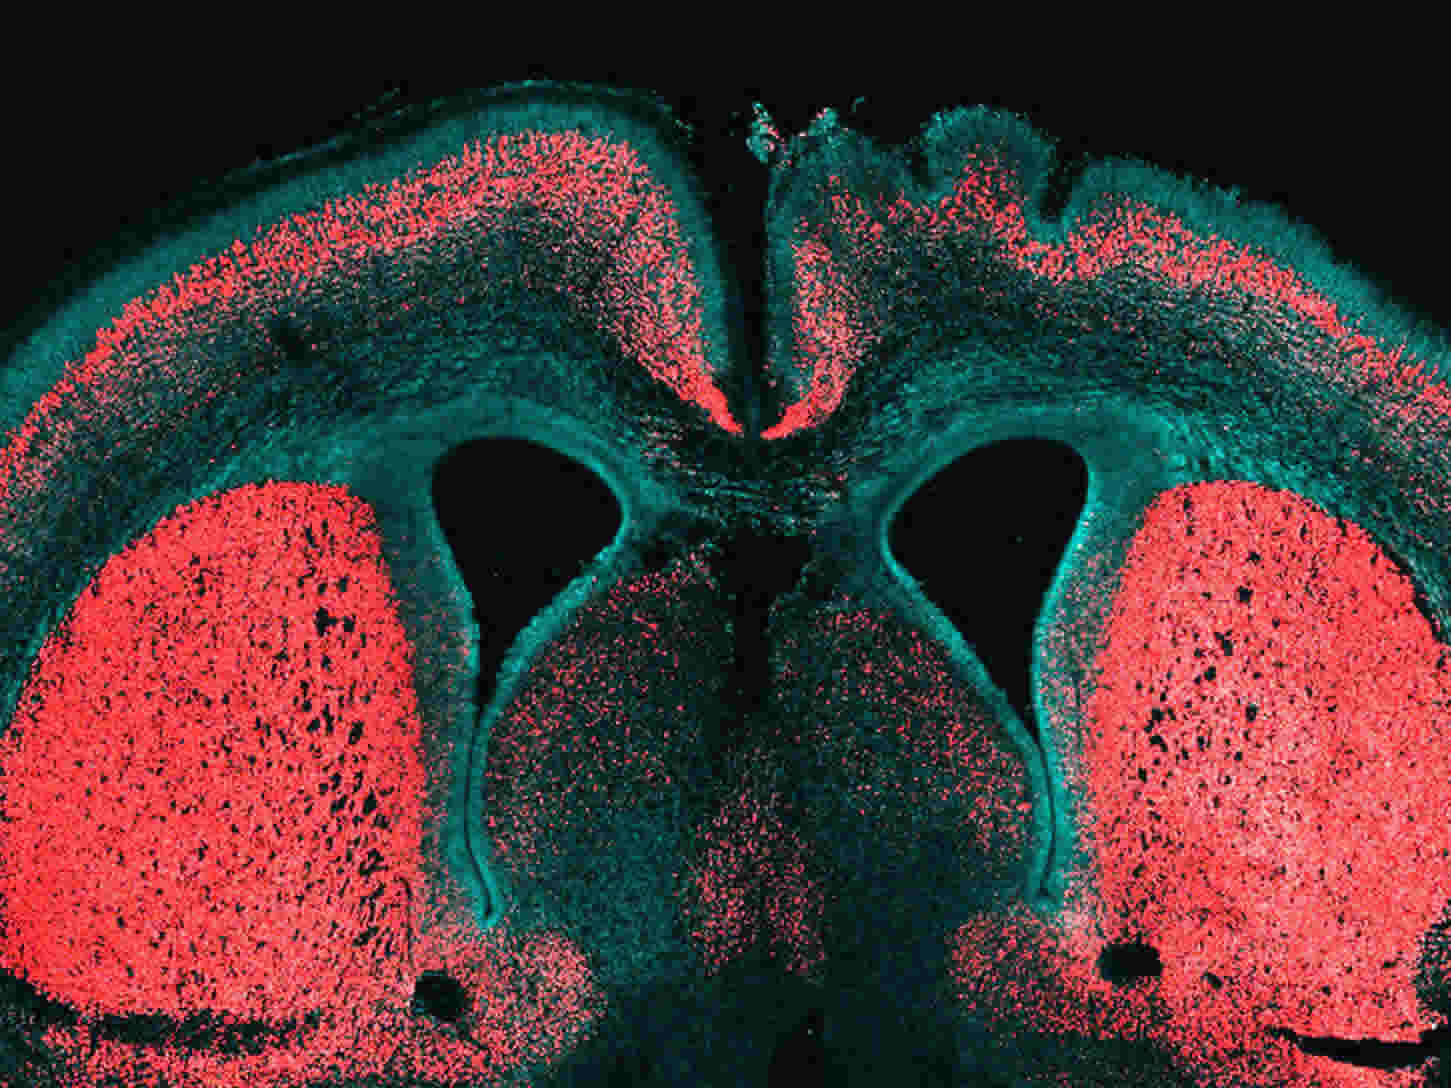 This image shows a brain slice of an embryonic mouse cerebral cortex. The caption best describes the image.